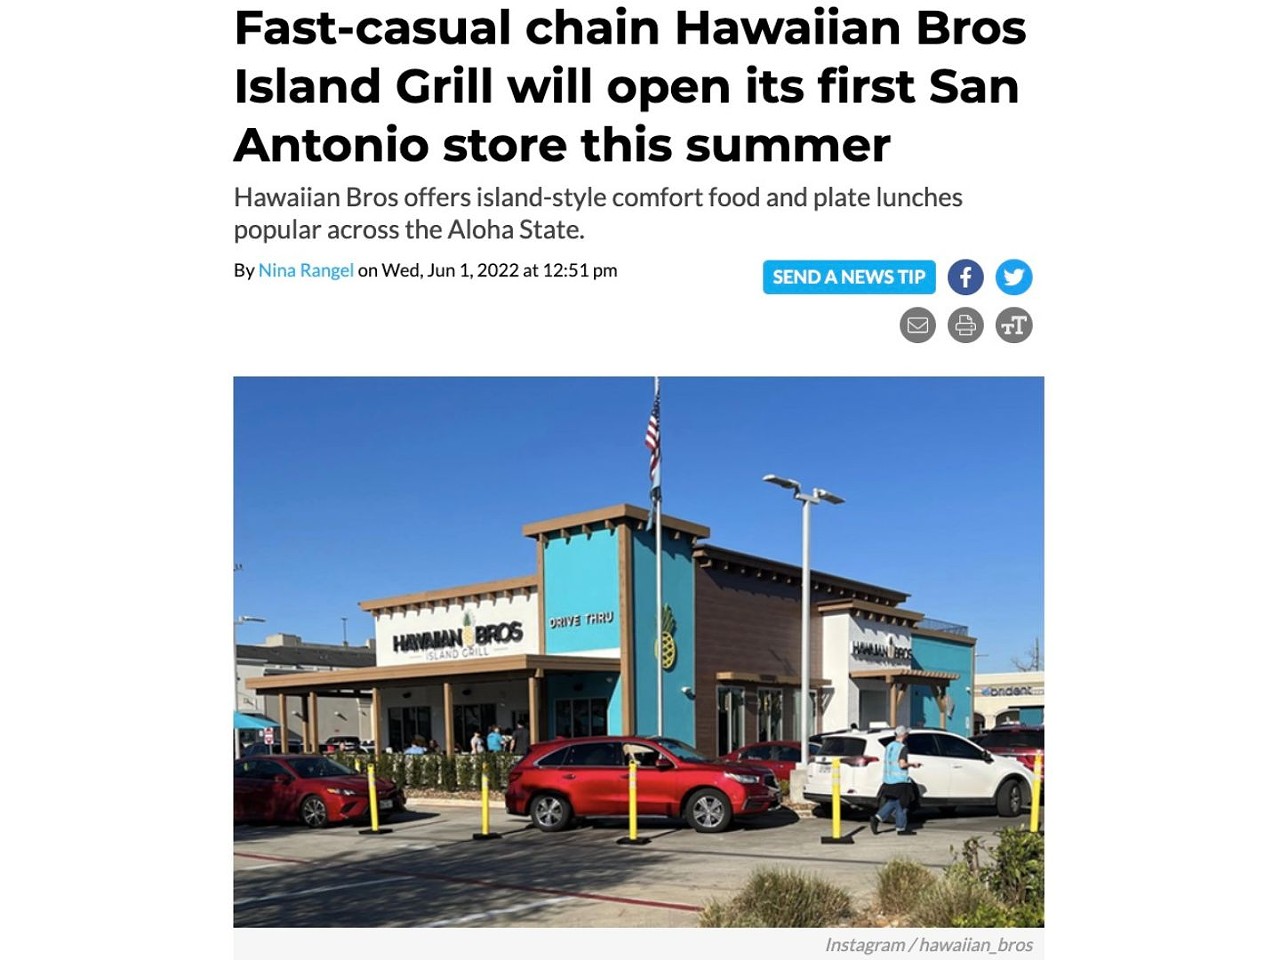 16. Fast-casual chain Hawaiian Bros Island Grill will open its first San Antonio store this summer